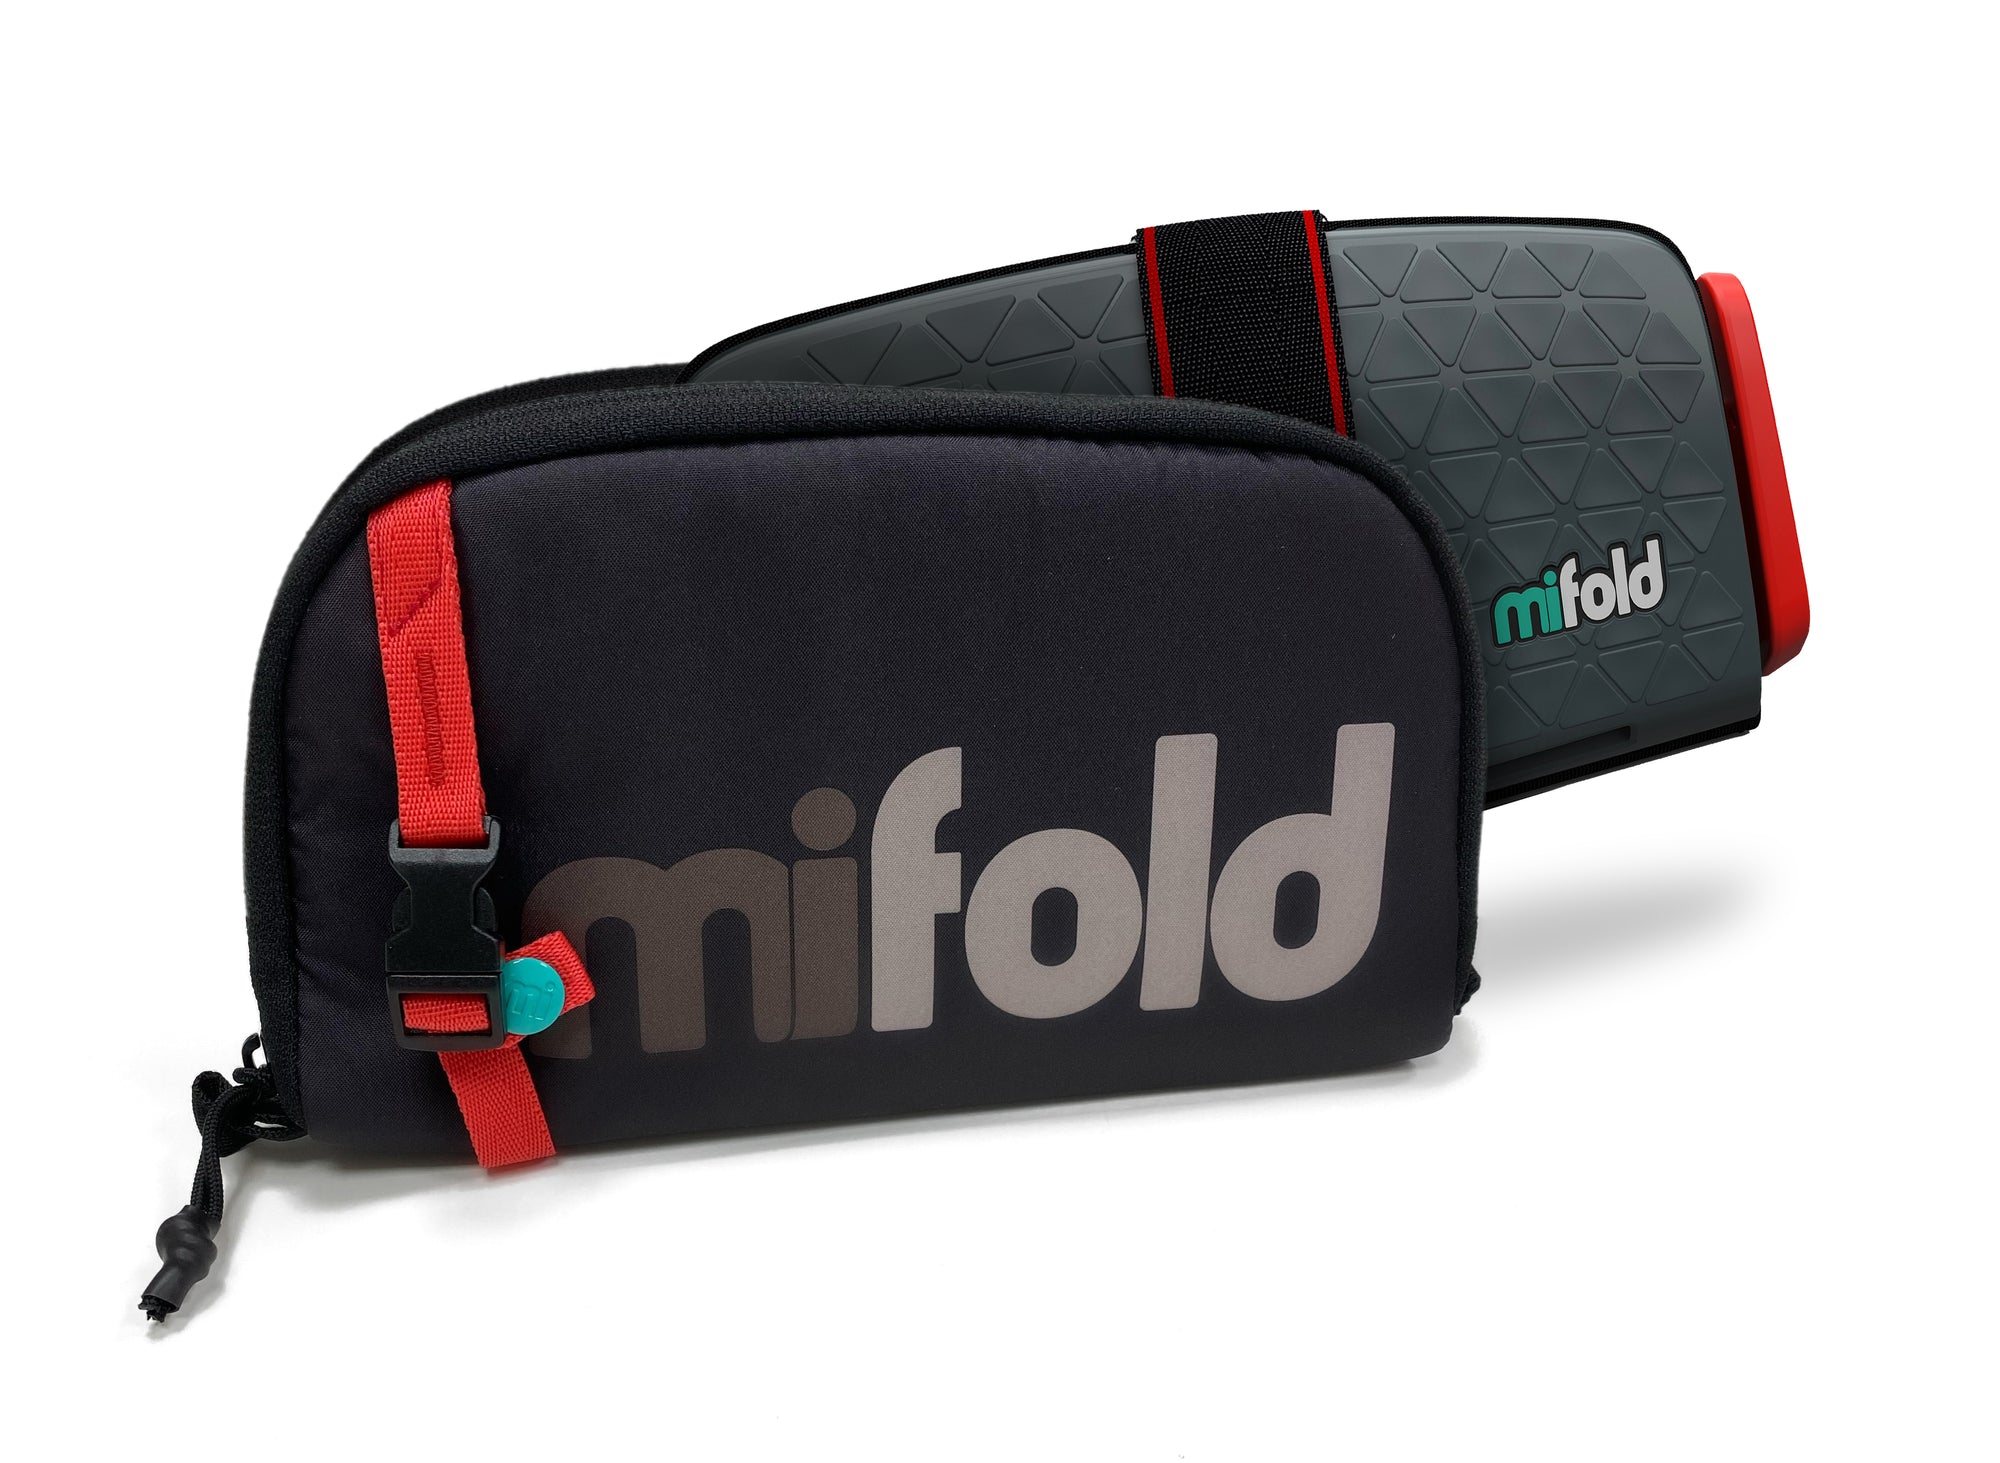 mifold - compact safety for every adventure